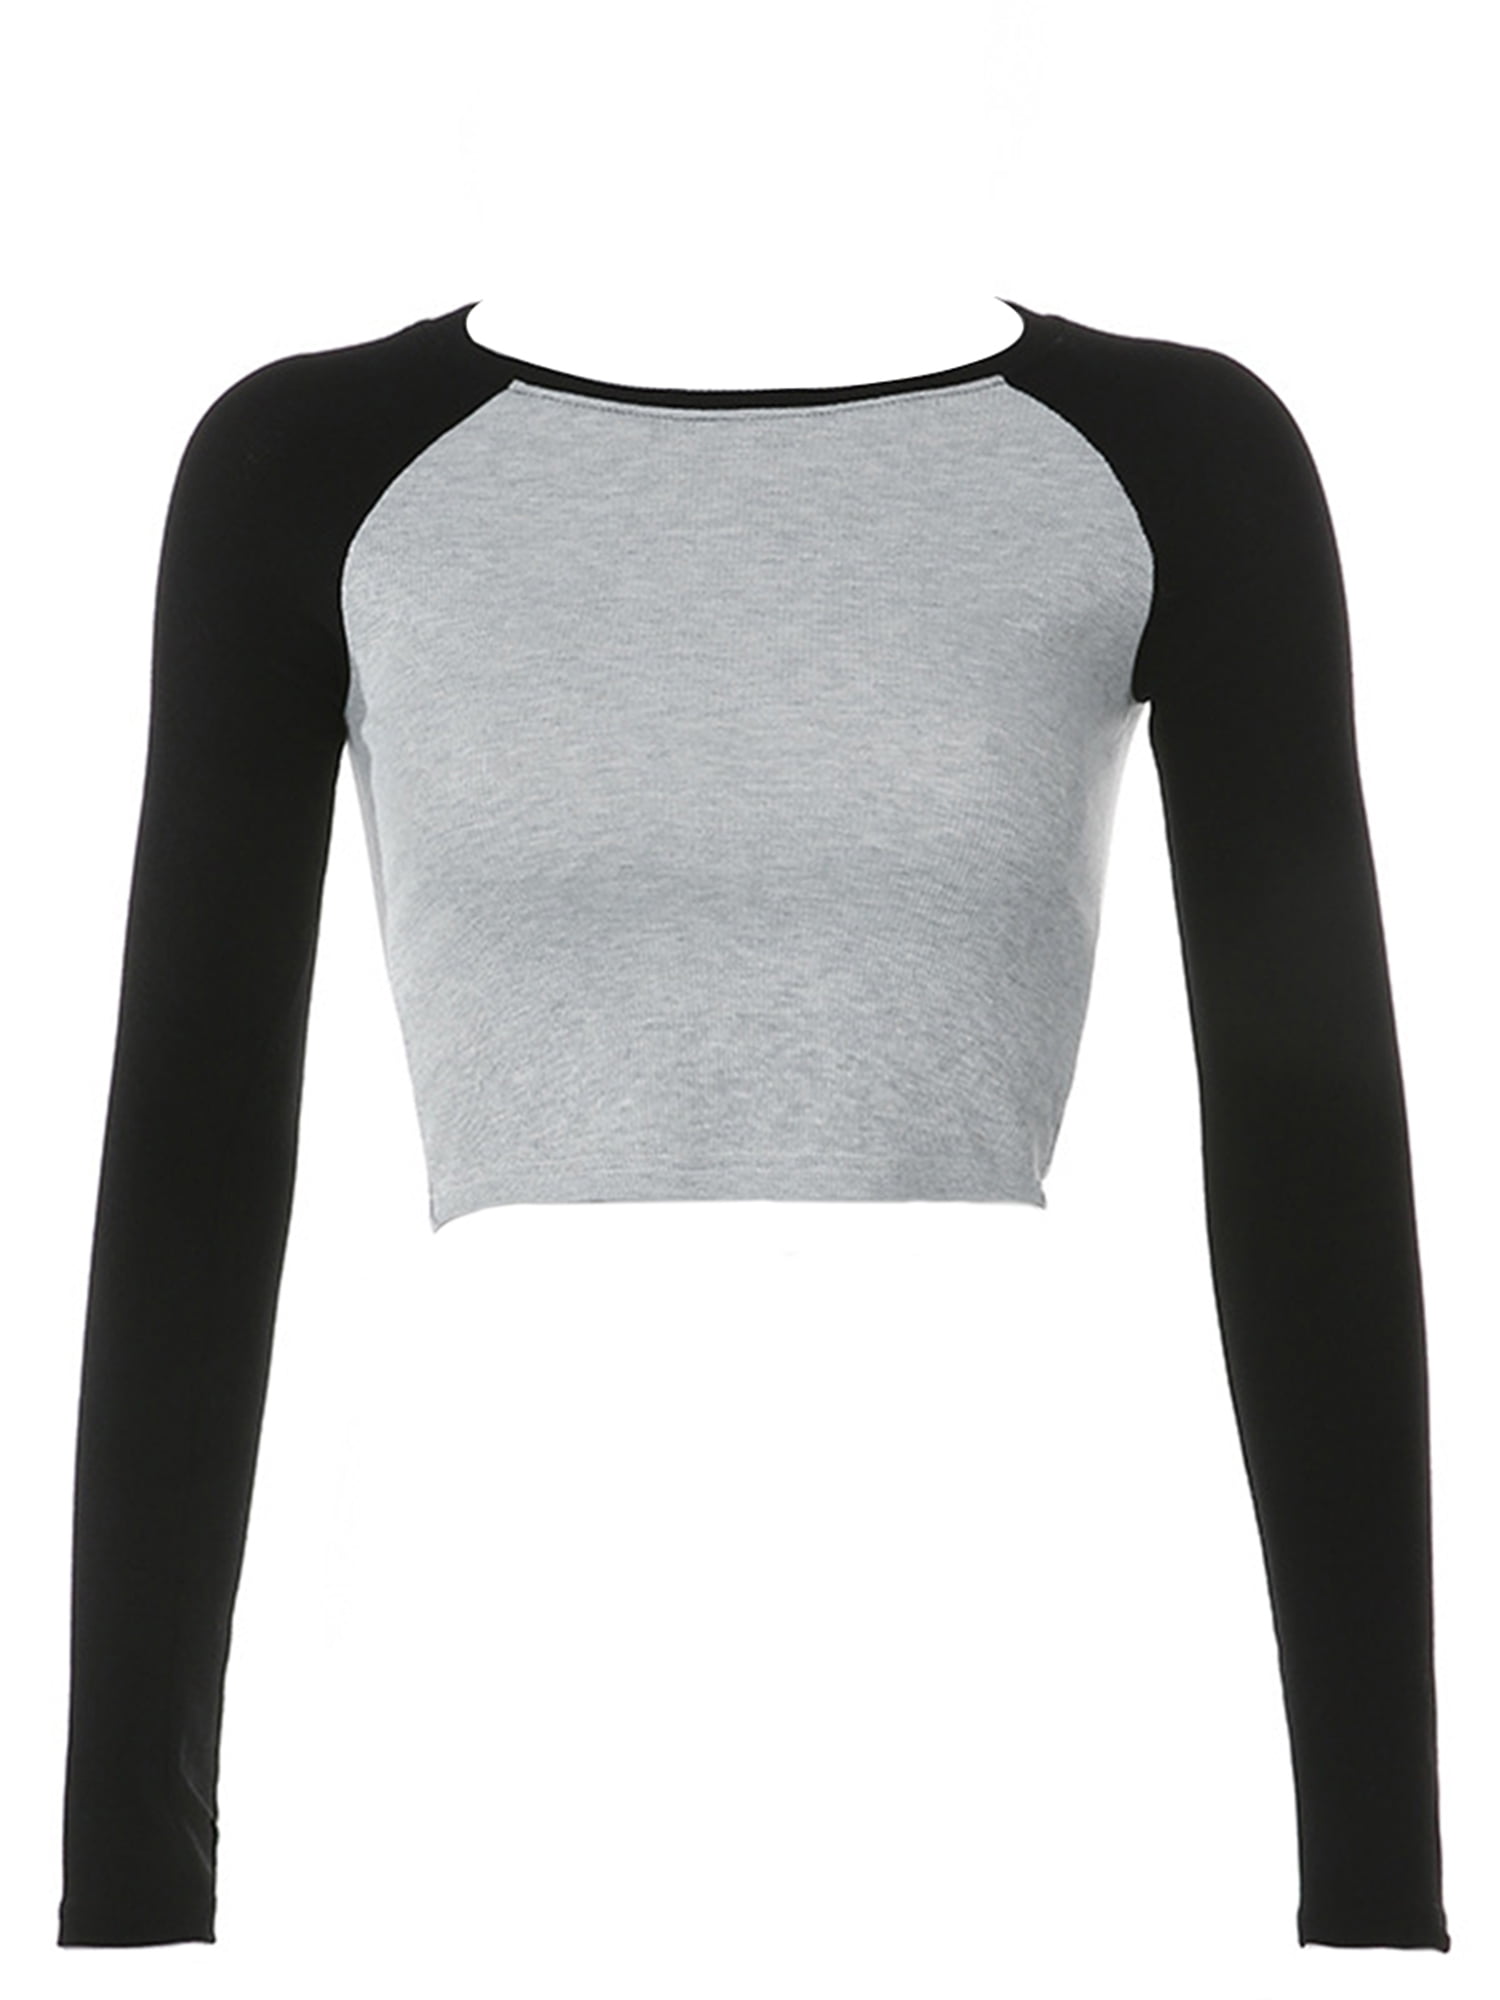 Girls Firetrap Elasticated Sportswear Crop Elastic Vest Top Sizes from 5 to 13 